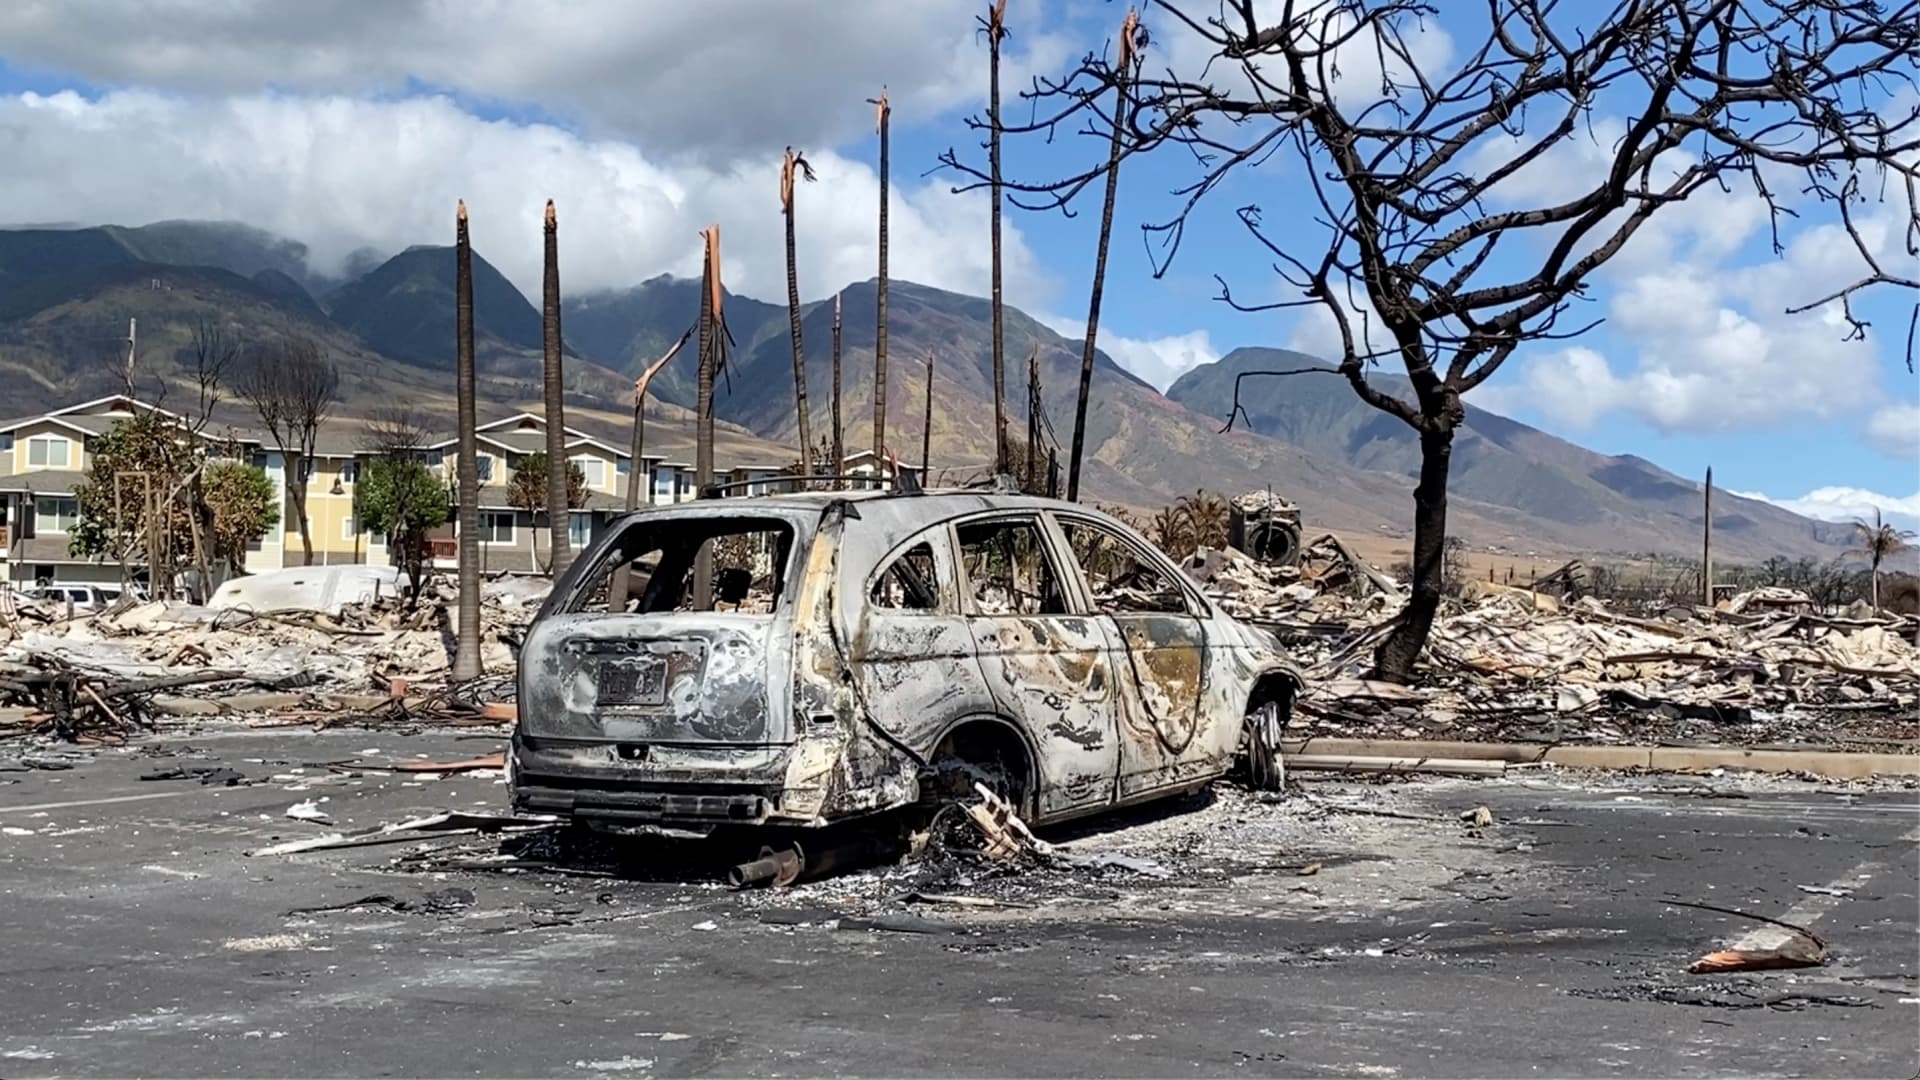 Hawaii tapping outside investigator as wildfire response scrutiny grows